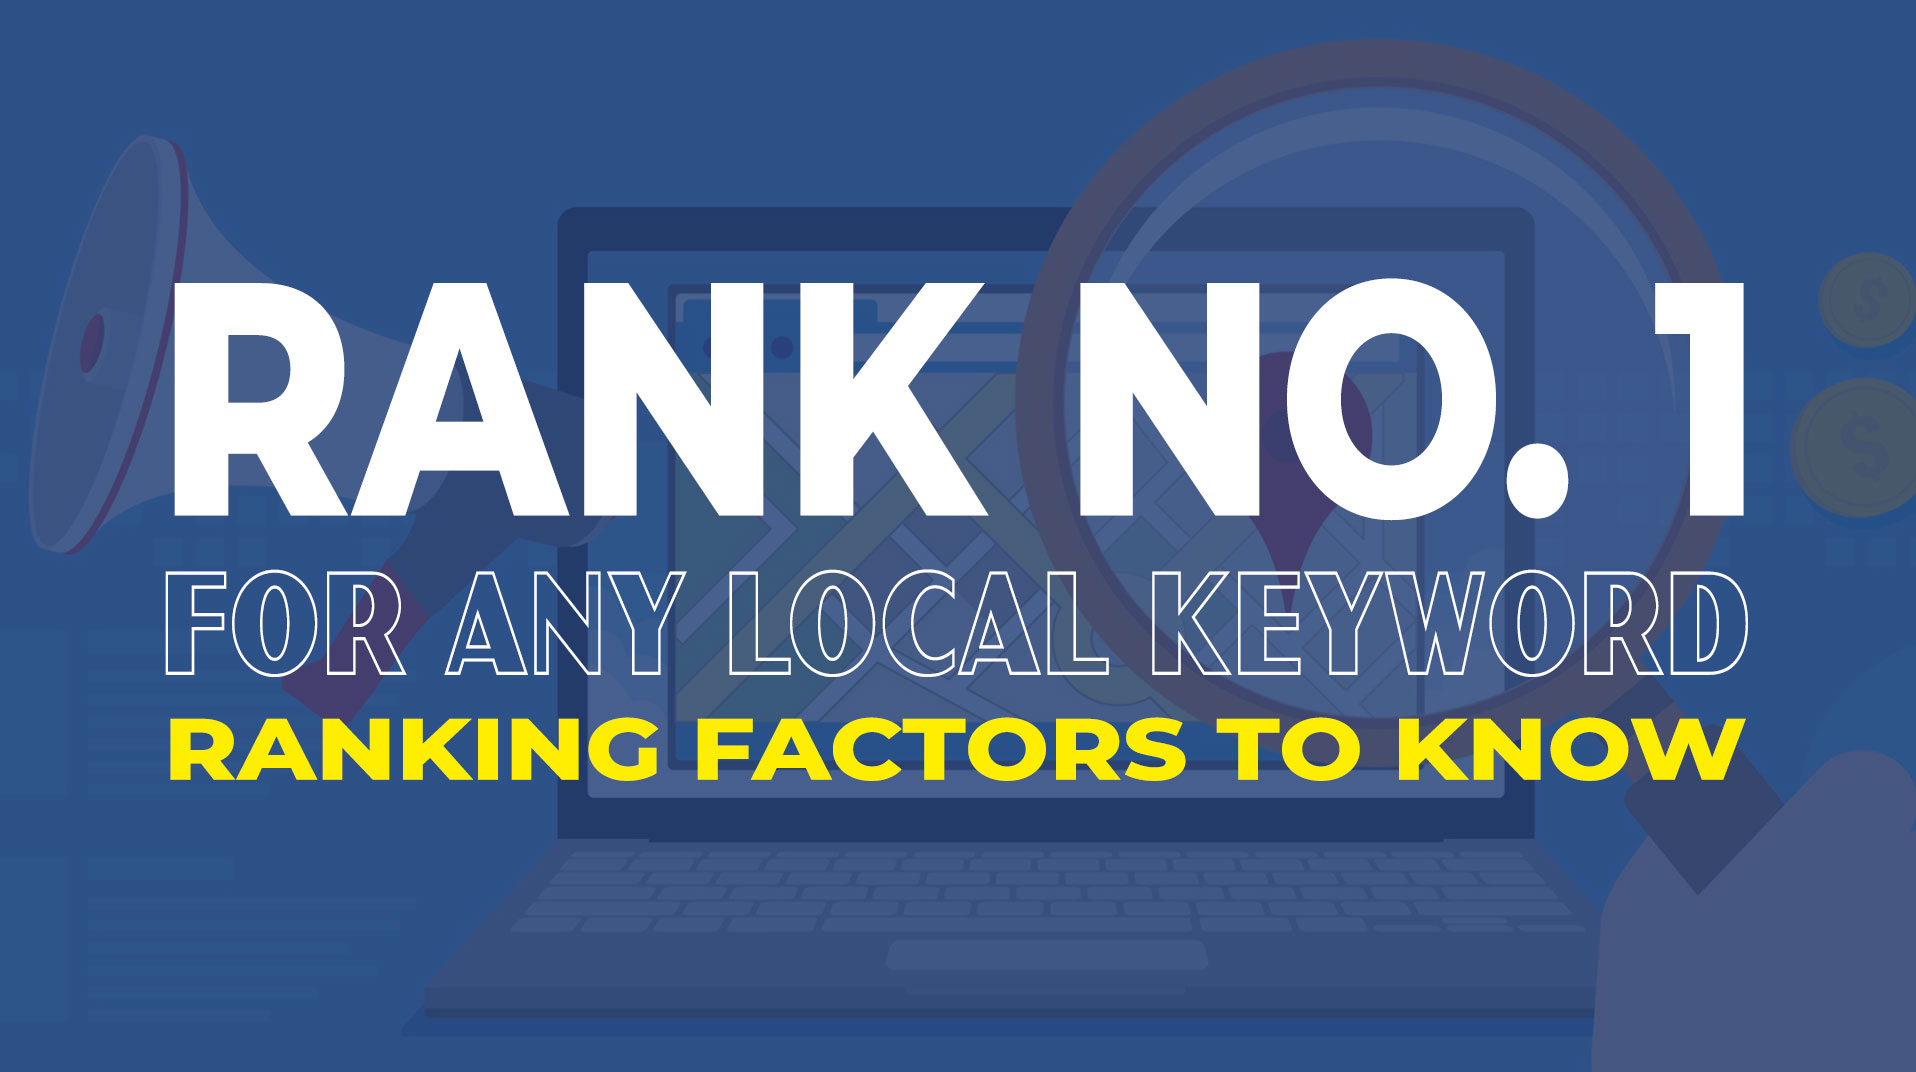 How to Rank number 1 for ANY local keyword?